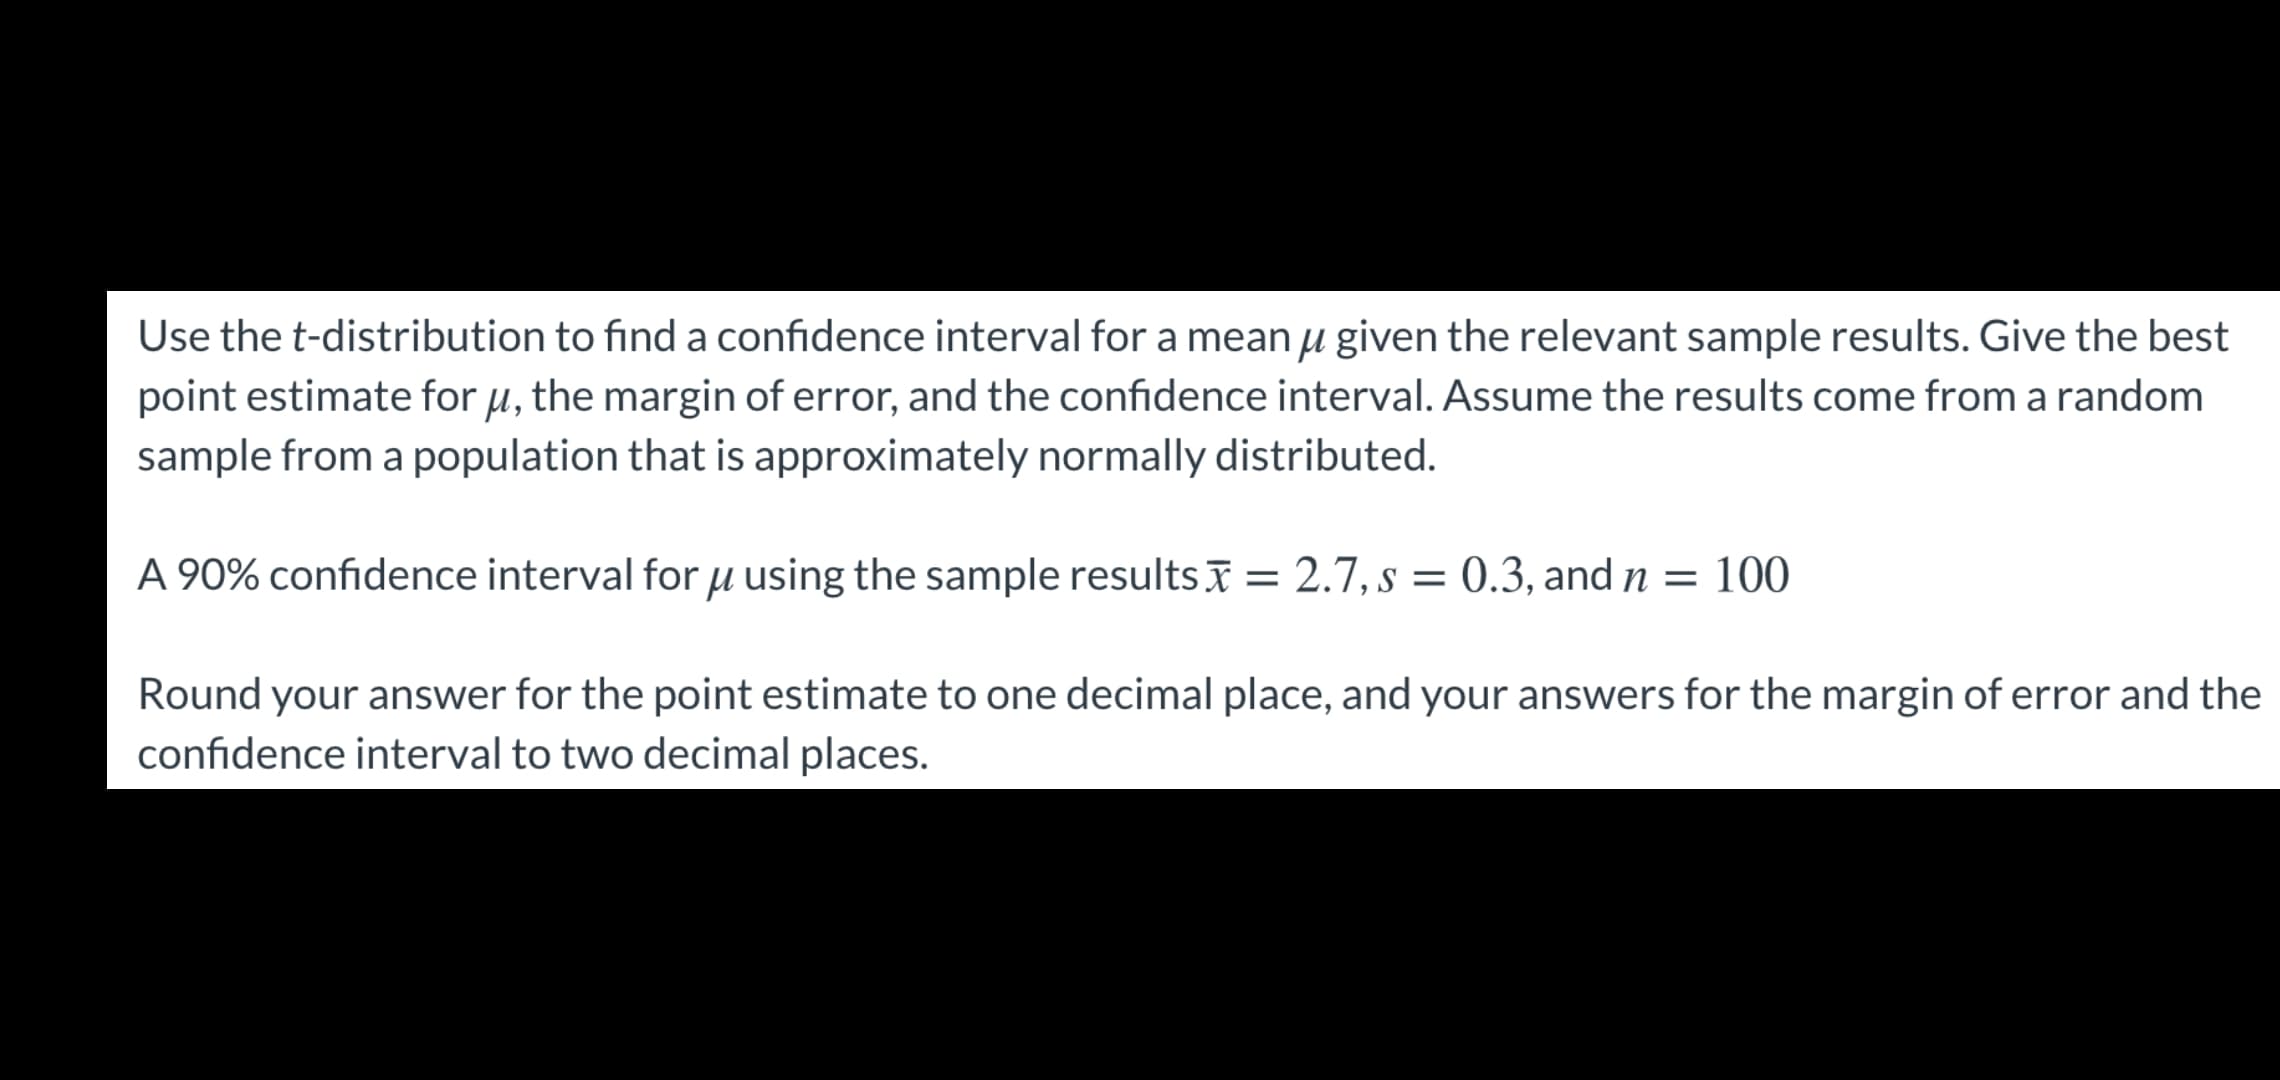 Use the t-distribution to find a confidence interval for a mean µ given the relevant sample results. Give the best
point estimate for u, the margin of error, and the confidence interval. Assume the results come from a random
sample from a population that is approximately normally distributed.
